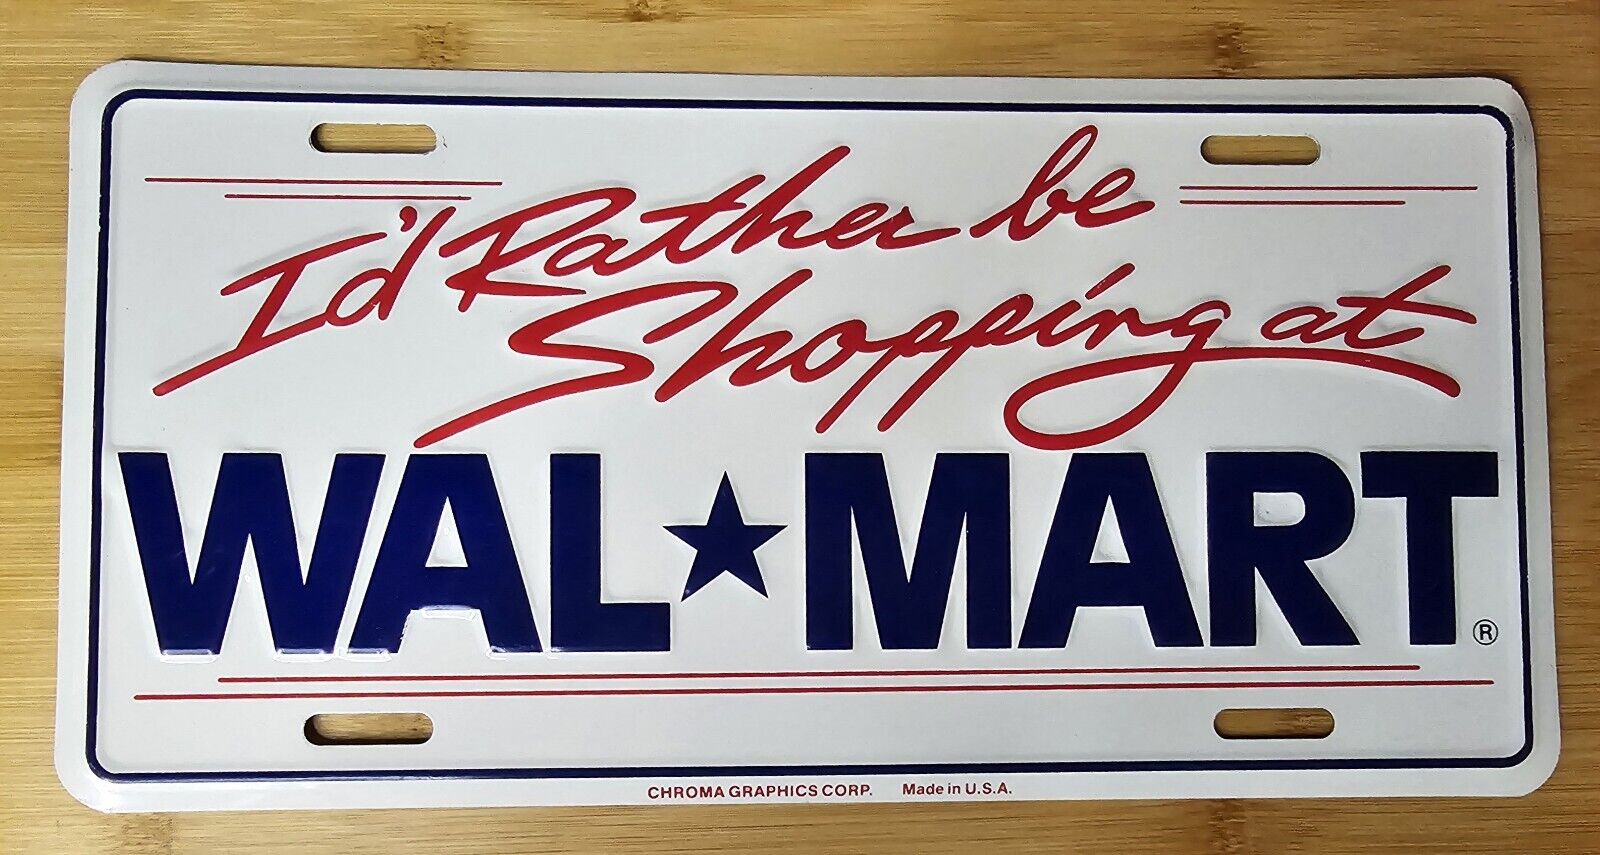 Vintage Walmart Booster License Plate I\'d Rather be Shopping at Wal-Mart USA NOS